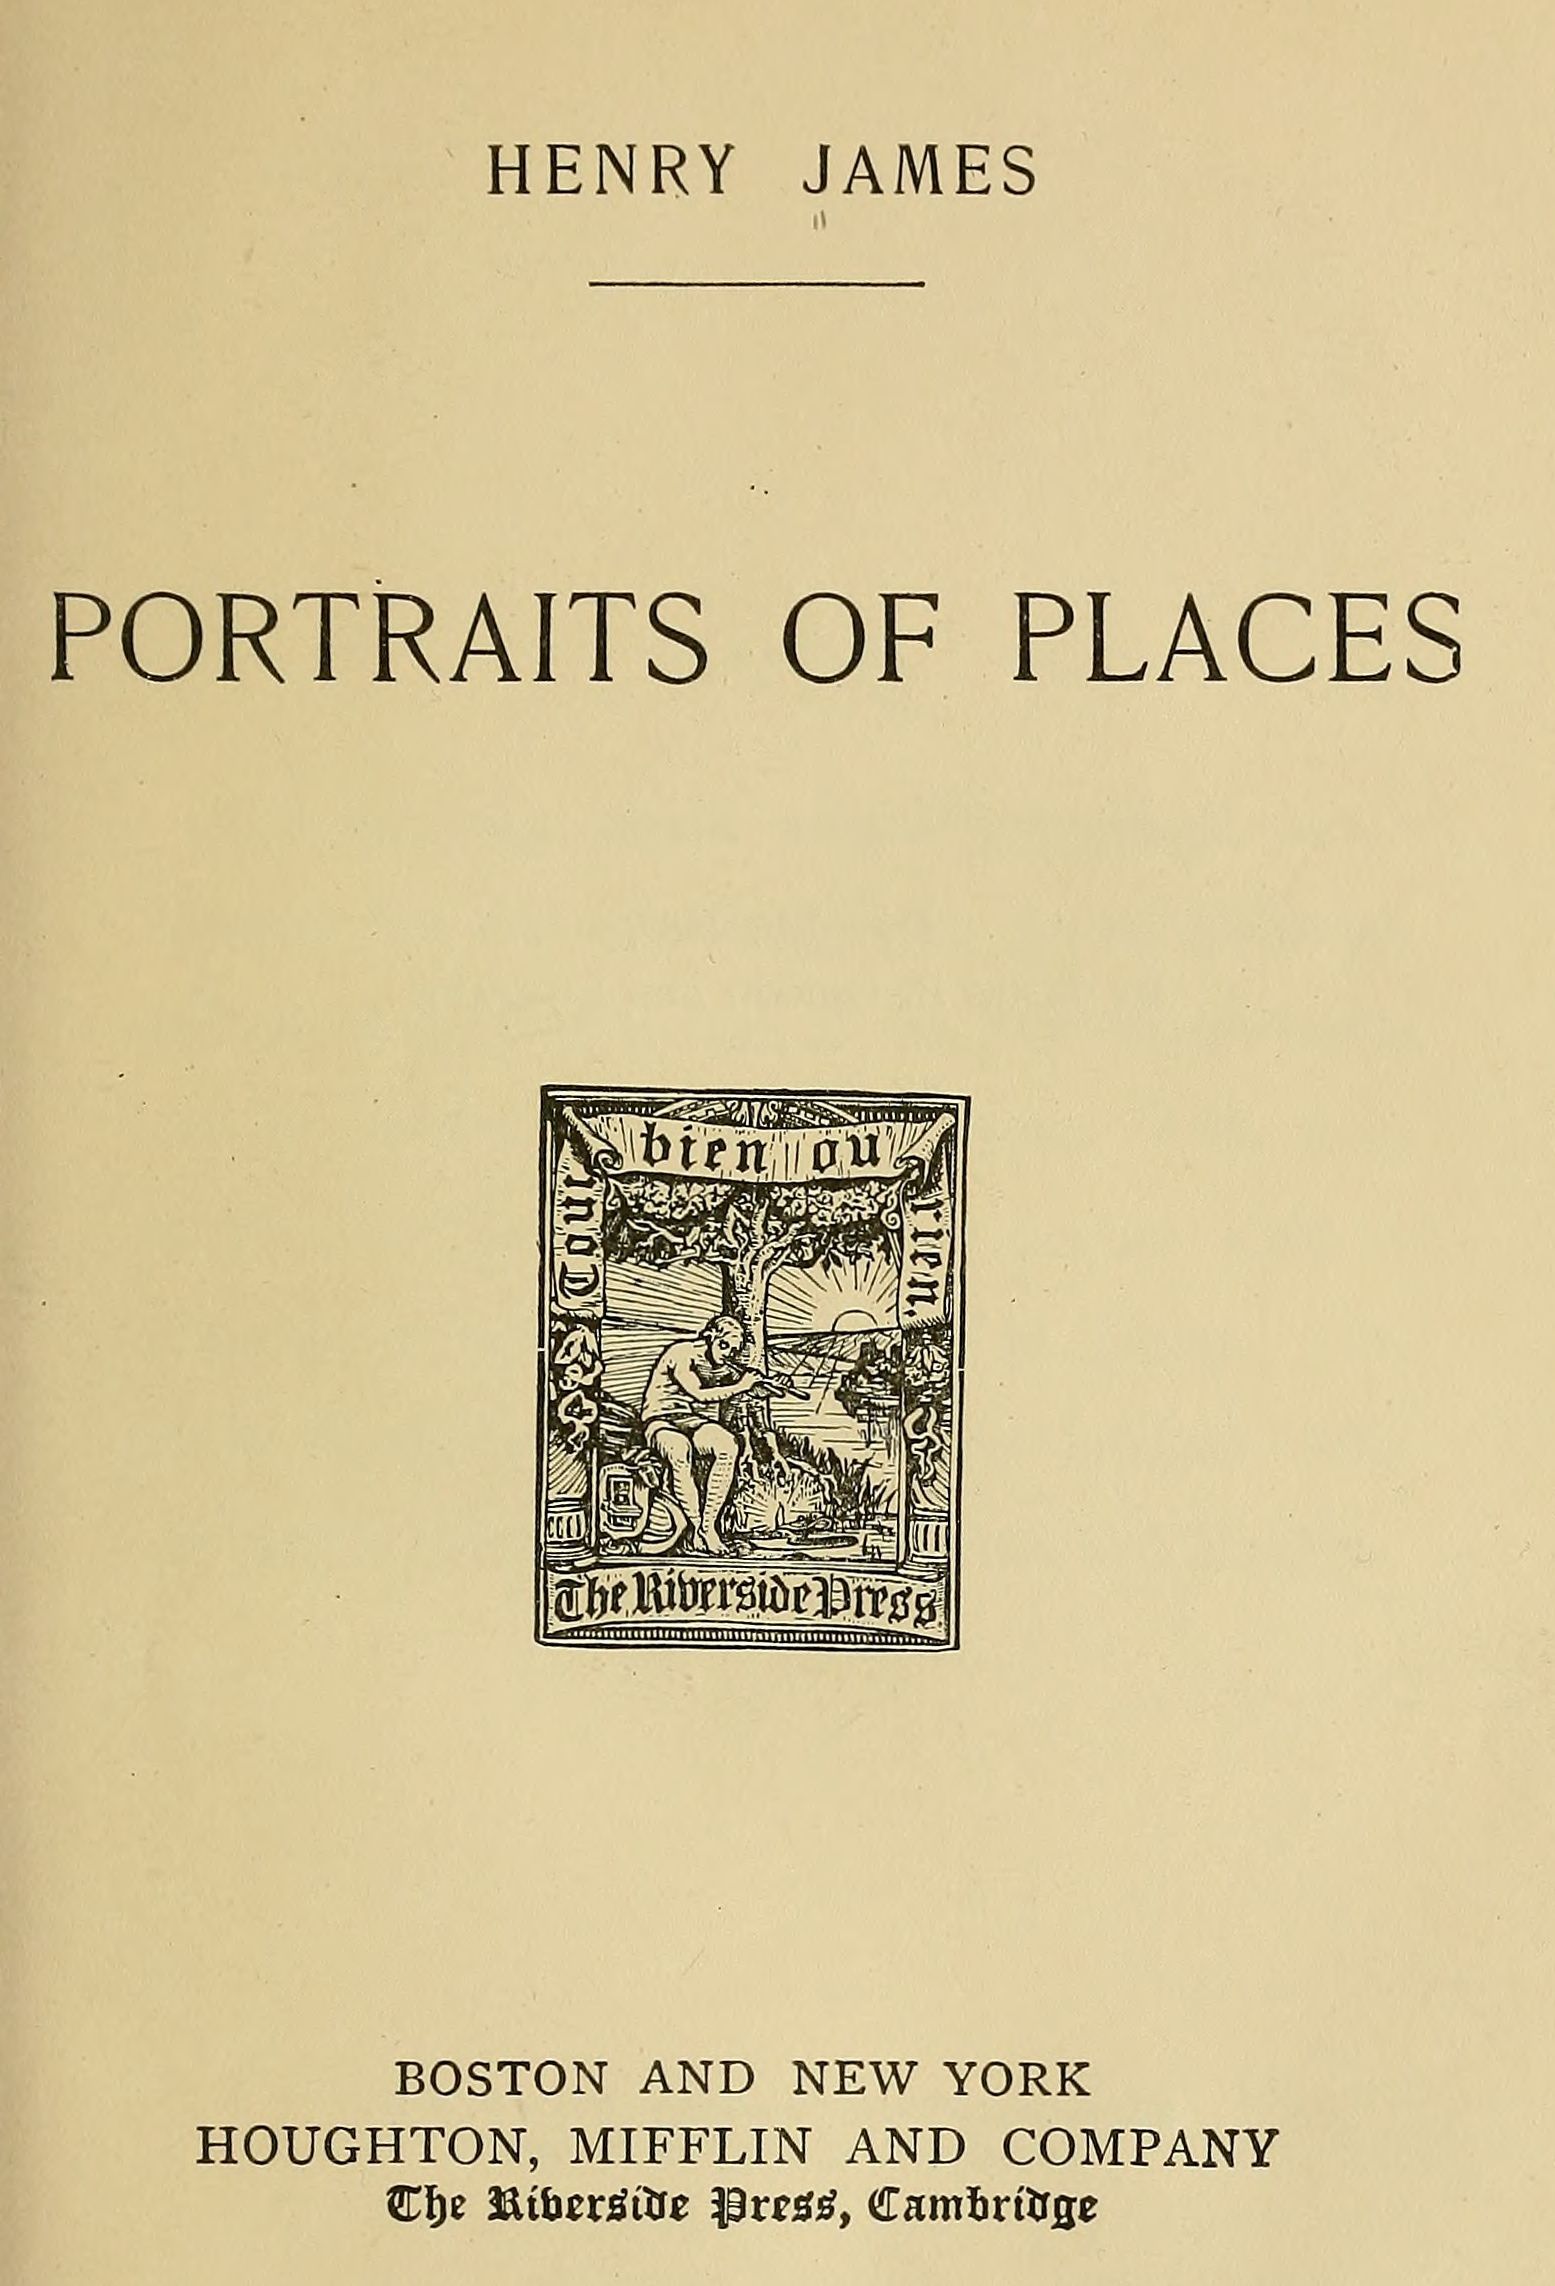 The Project Gutenberg eBook of Portraits of places, by Henry James. photo